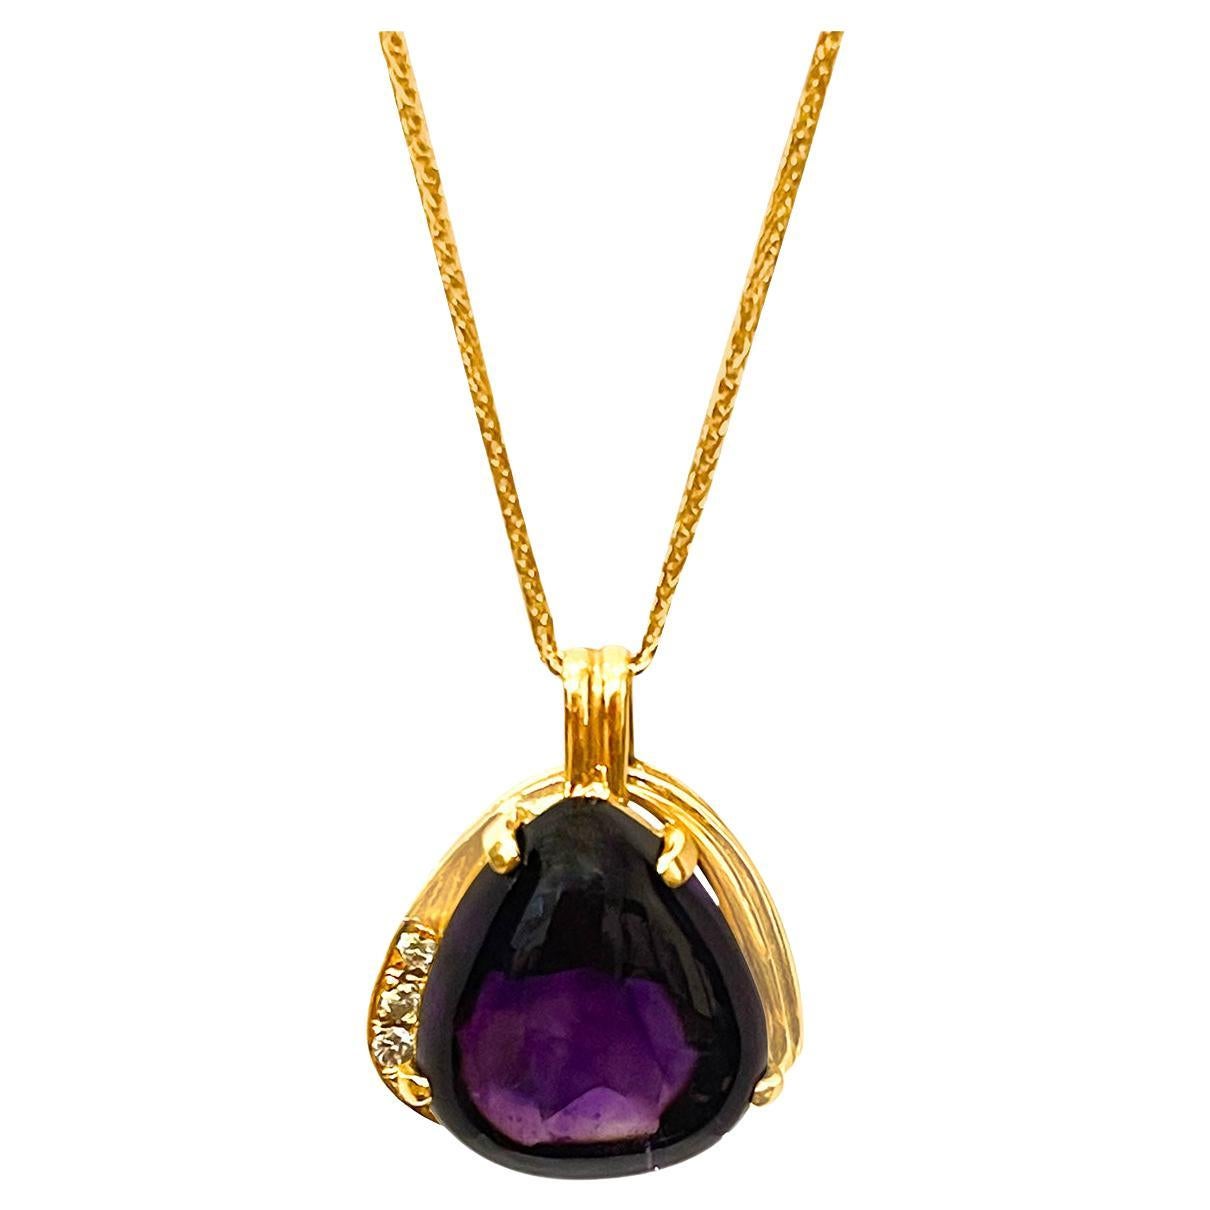 10 Carat Tear Drop Amethyst and Diamonds Pendent Necklace 18 Karat Yellow Gold For Sale